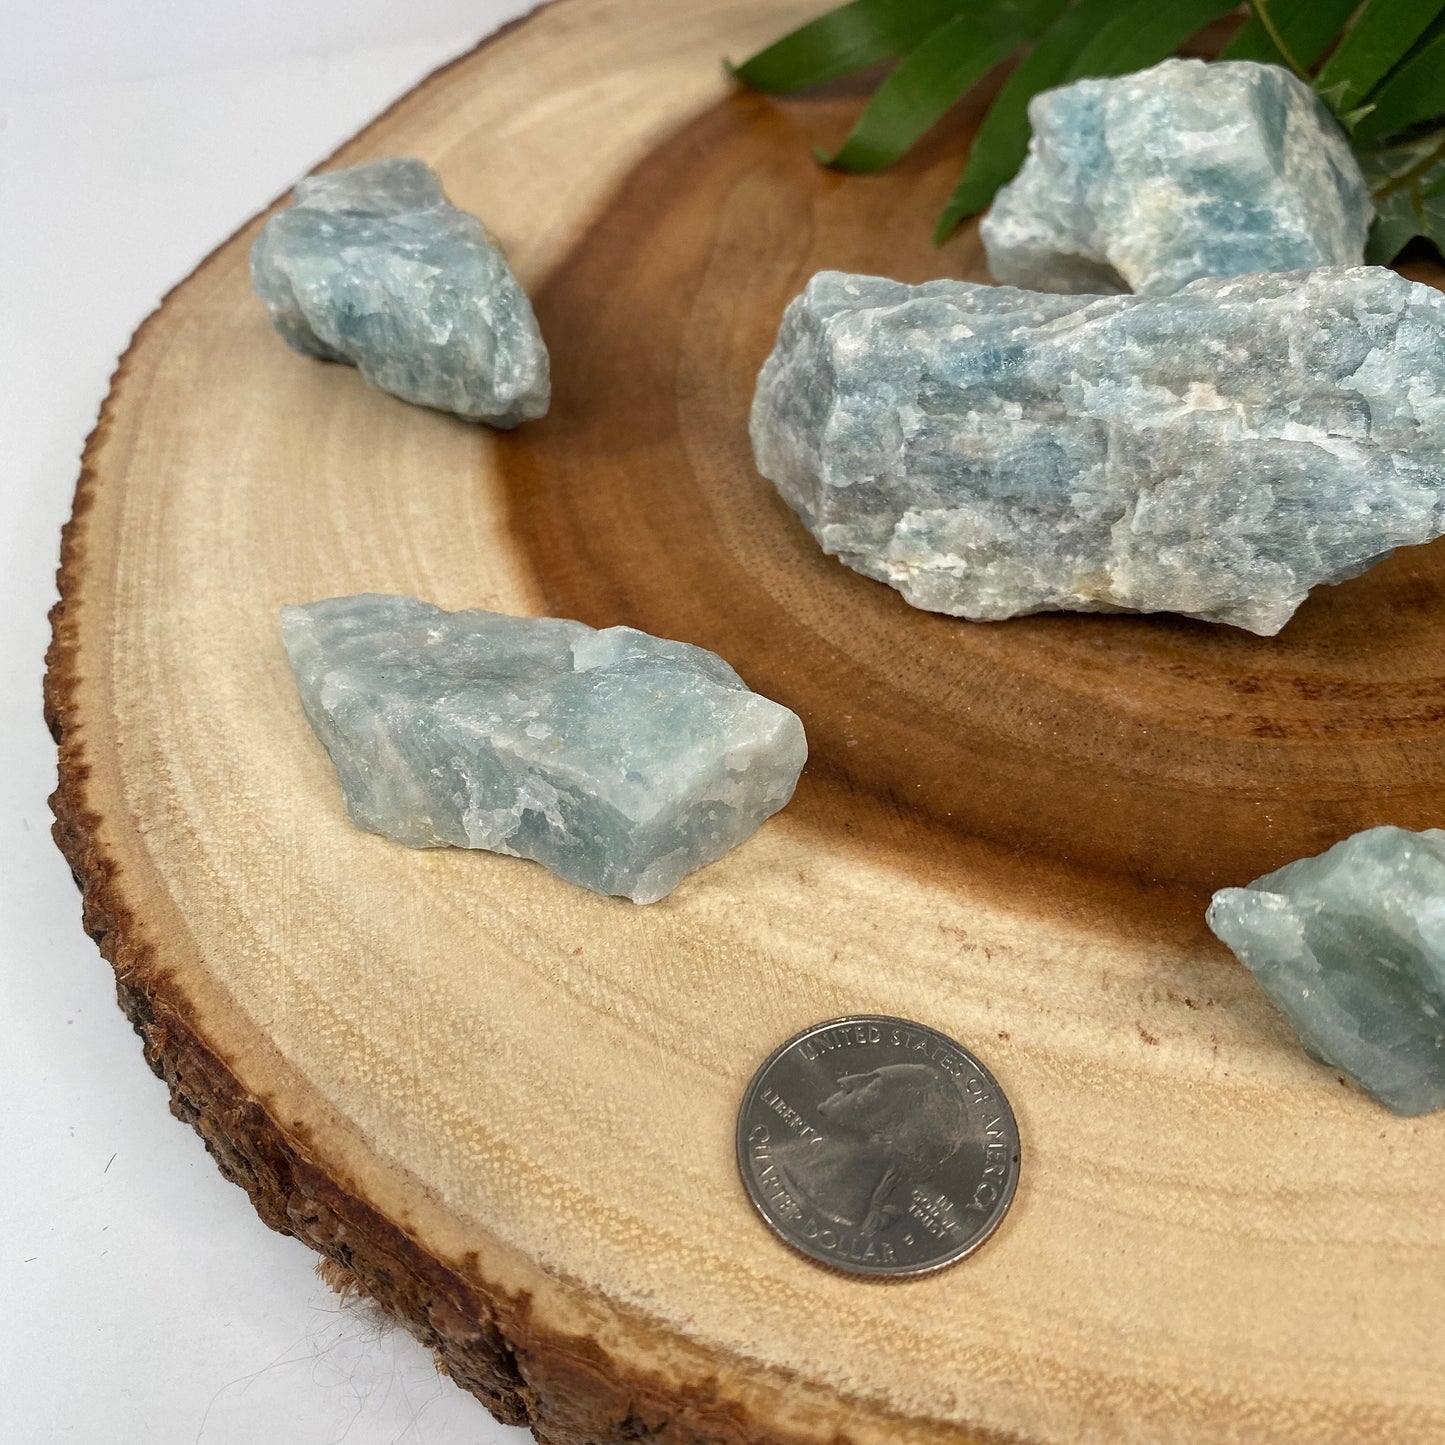 Large Aquamarine Rough - Natural Empowerment Crystal from Brazil - Genuine Raw Blue Crystal for Meditation, Altar, Crystal Grids